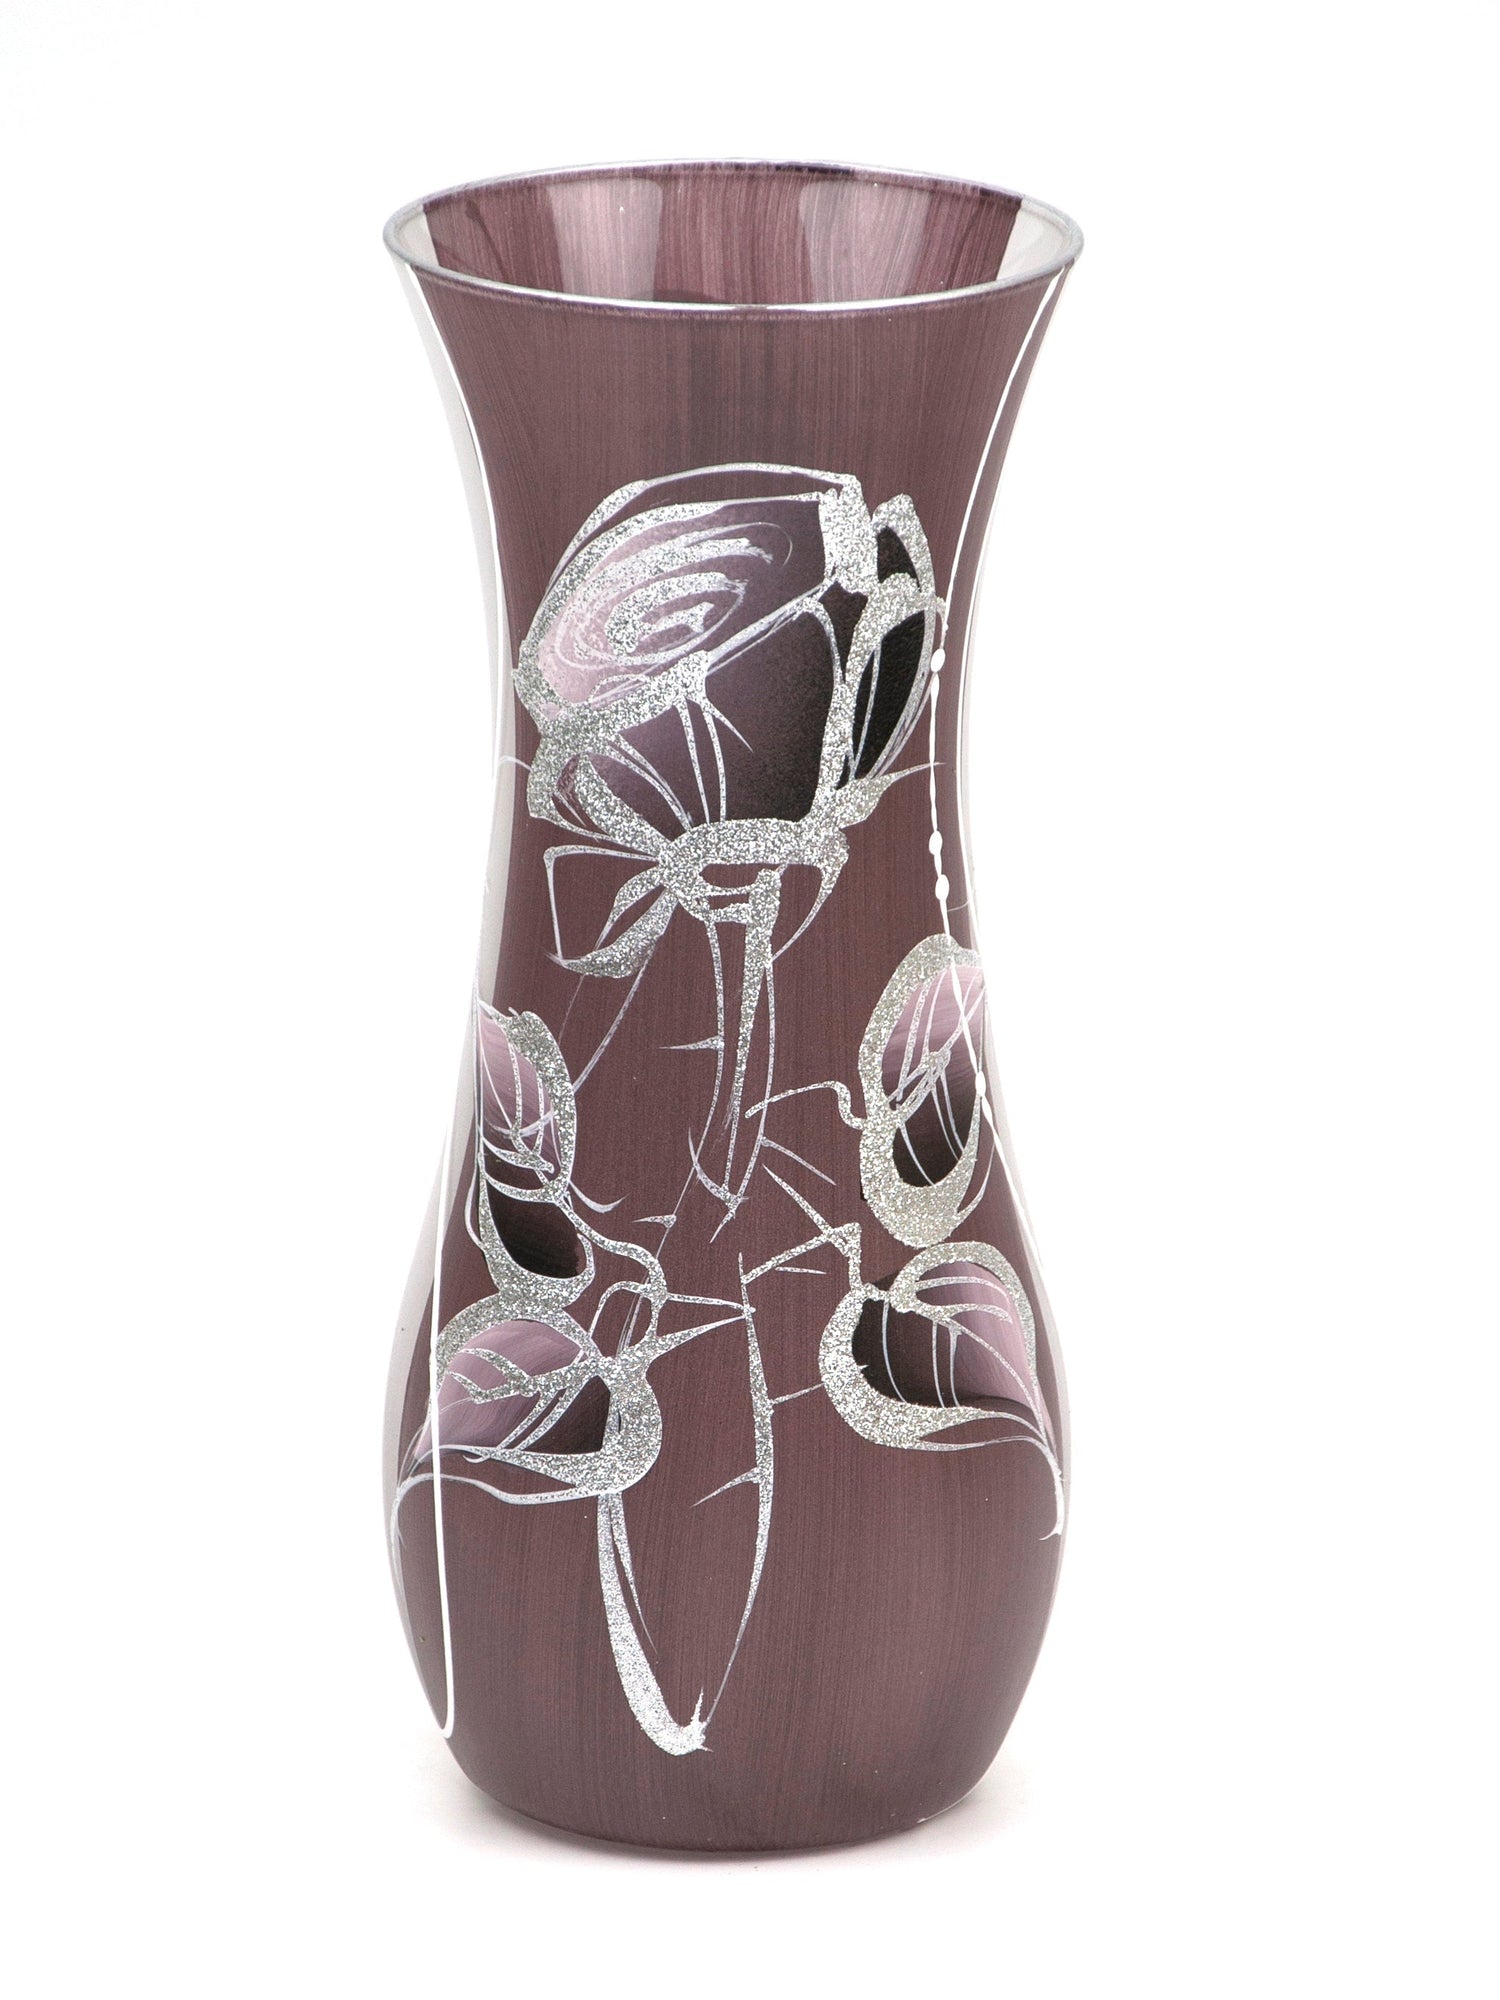 Table brown art decorative glass vase, HAND PAINTED